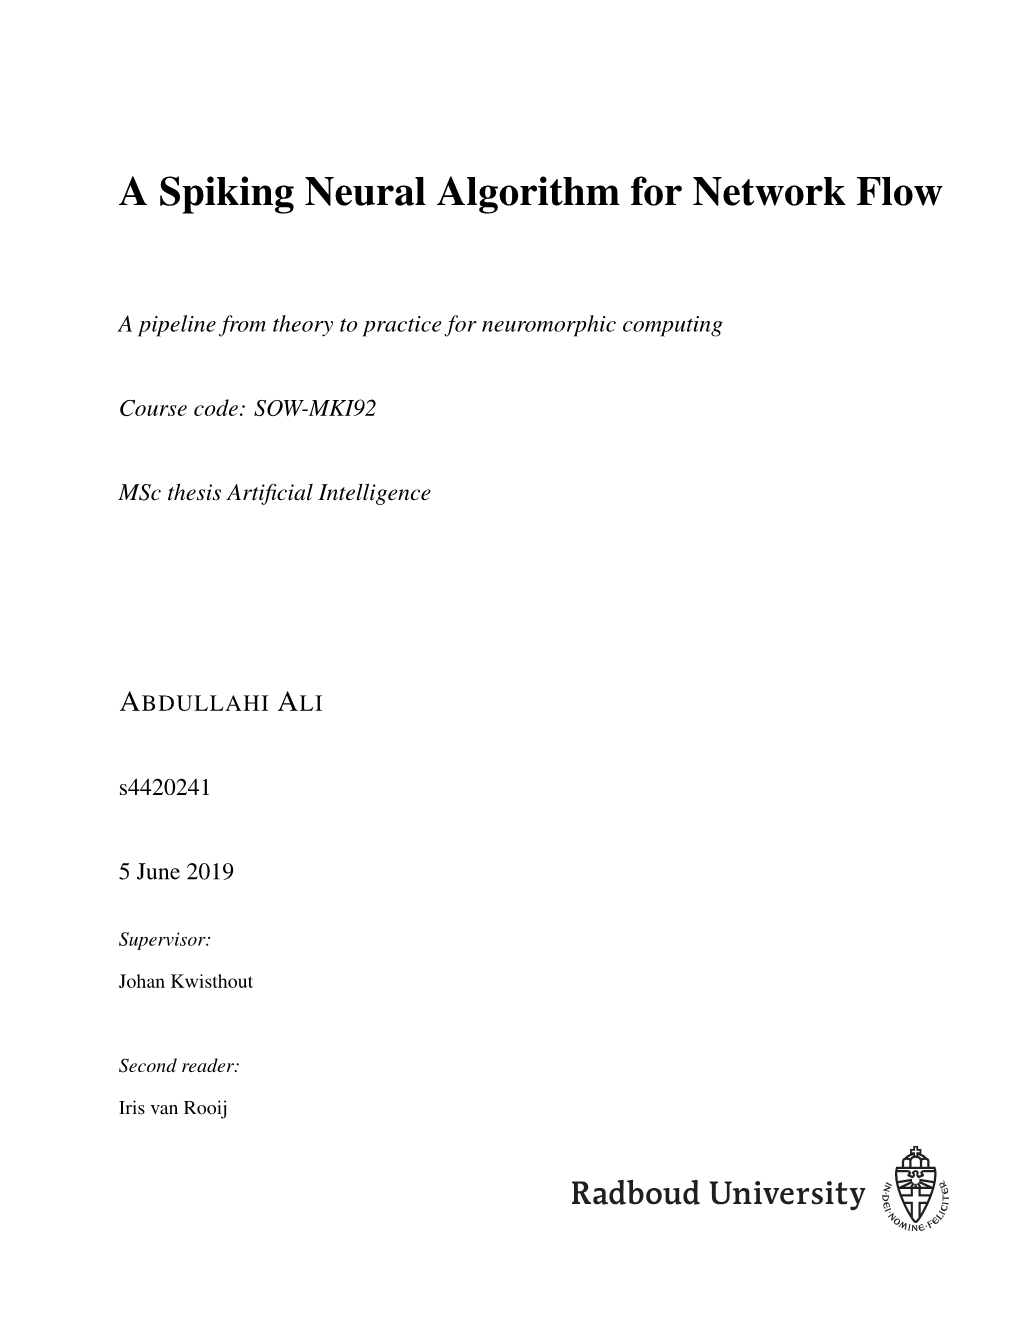 A Spiking Neural Algorithm for Network Flow